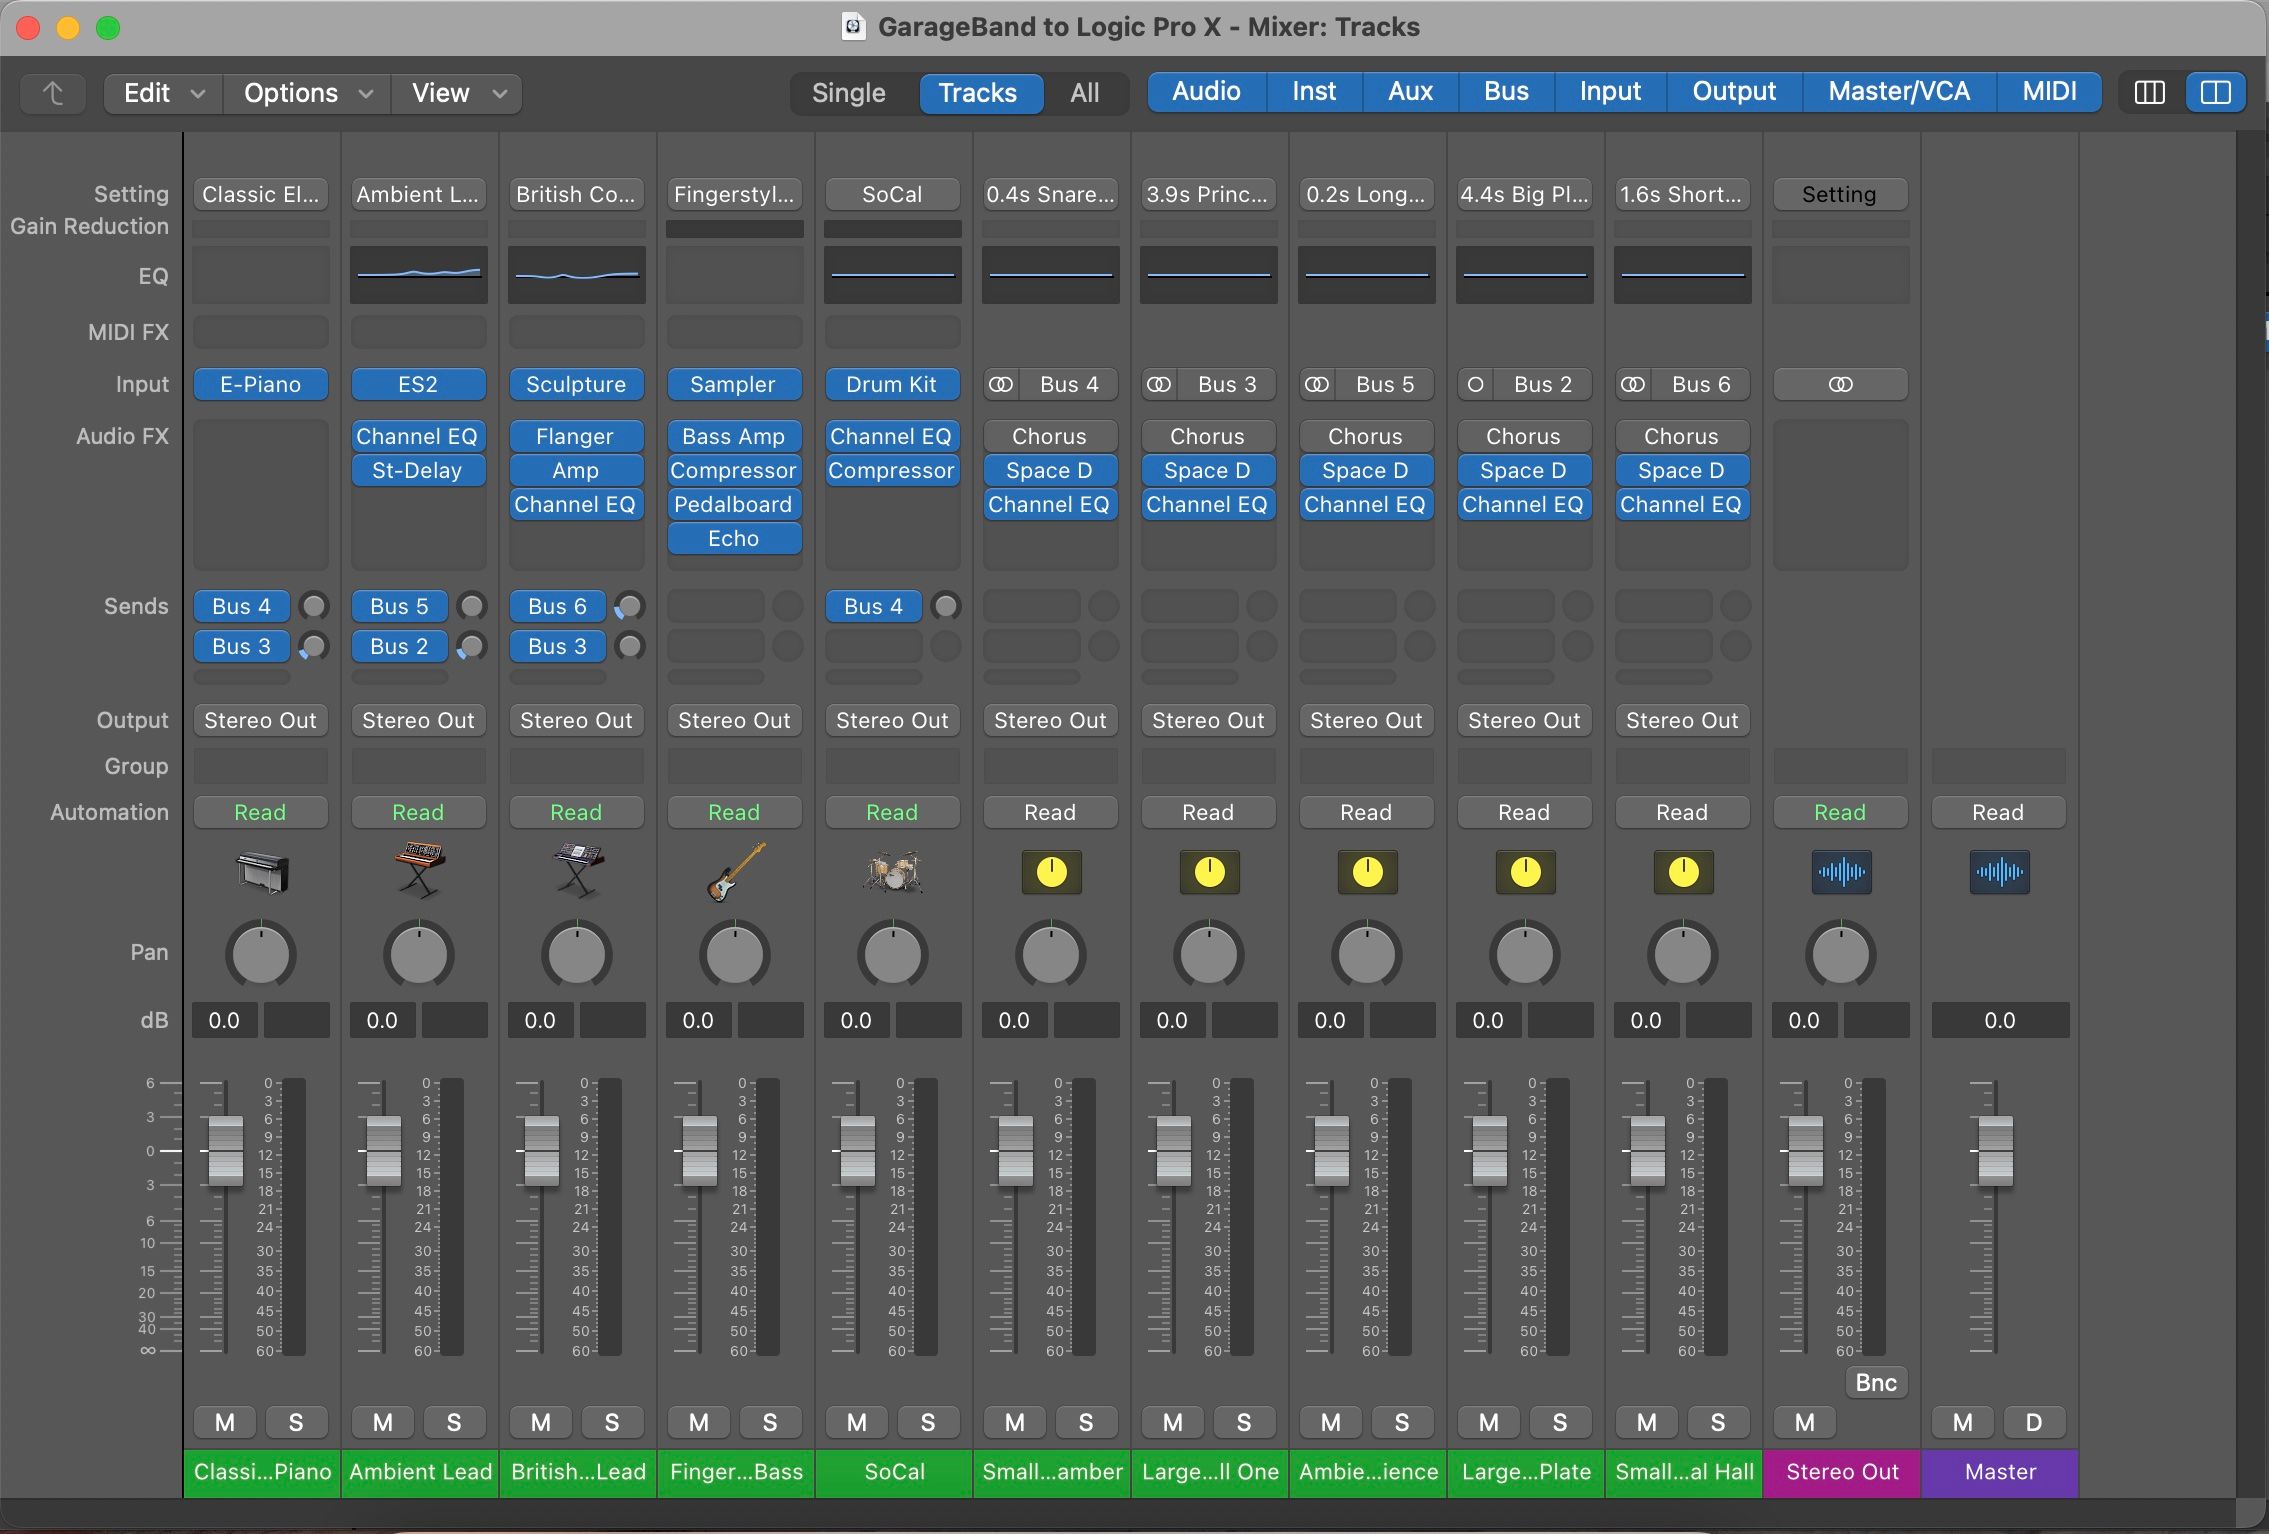 Full screen view of the audio mixer in Logic Pro X